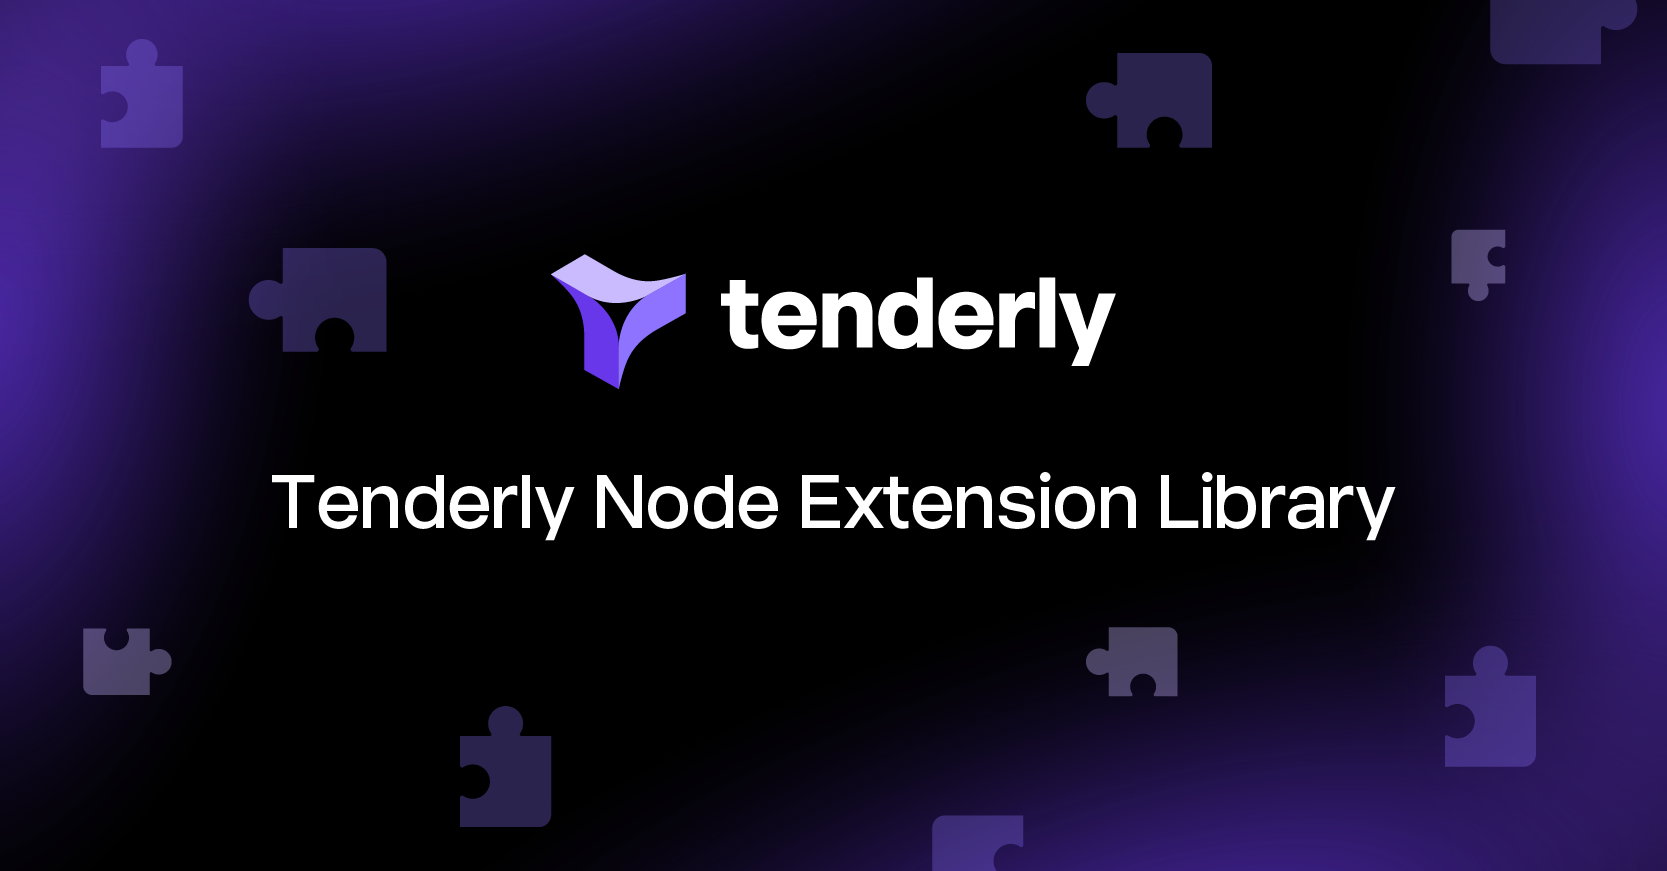 Tenderly Node Extension Library